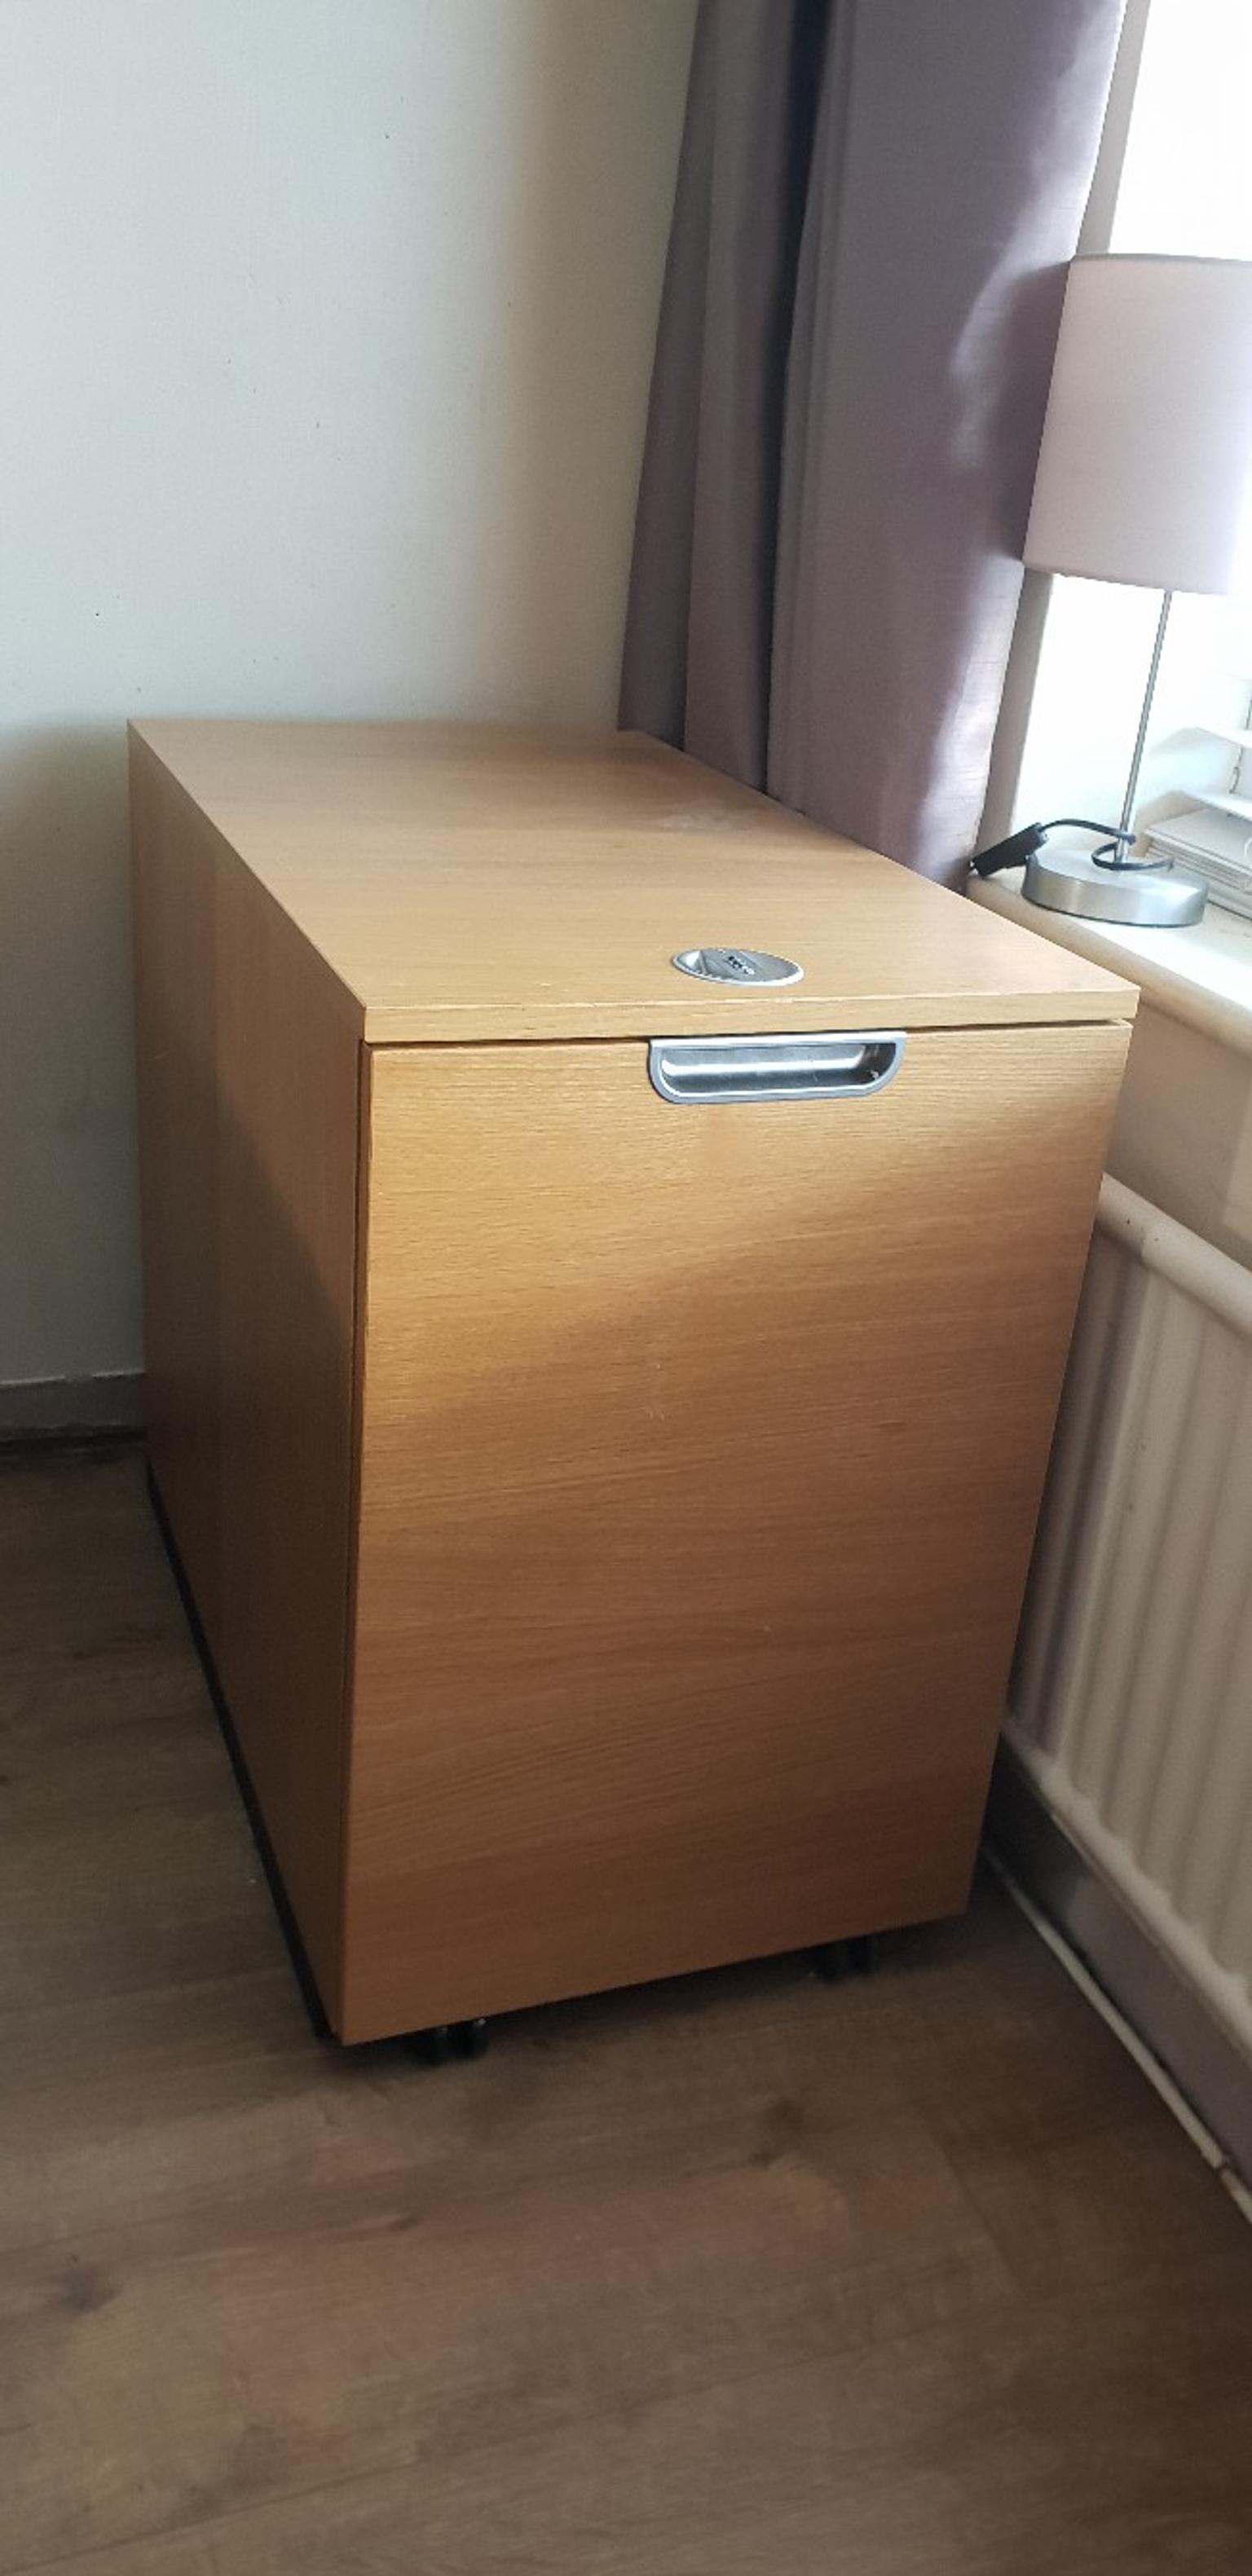 Ikea Galant Lockable Printer Filing Cabinet In B80 Redditch For